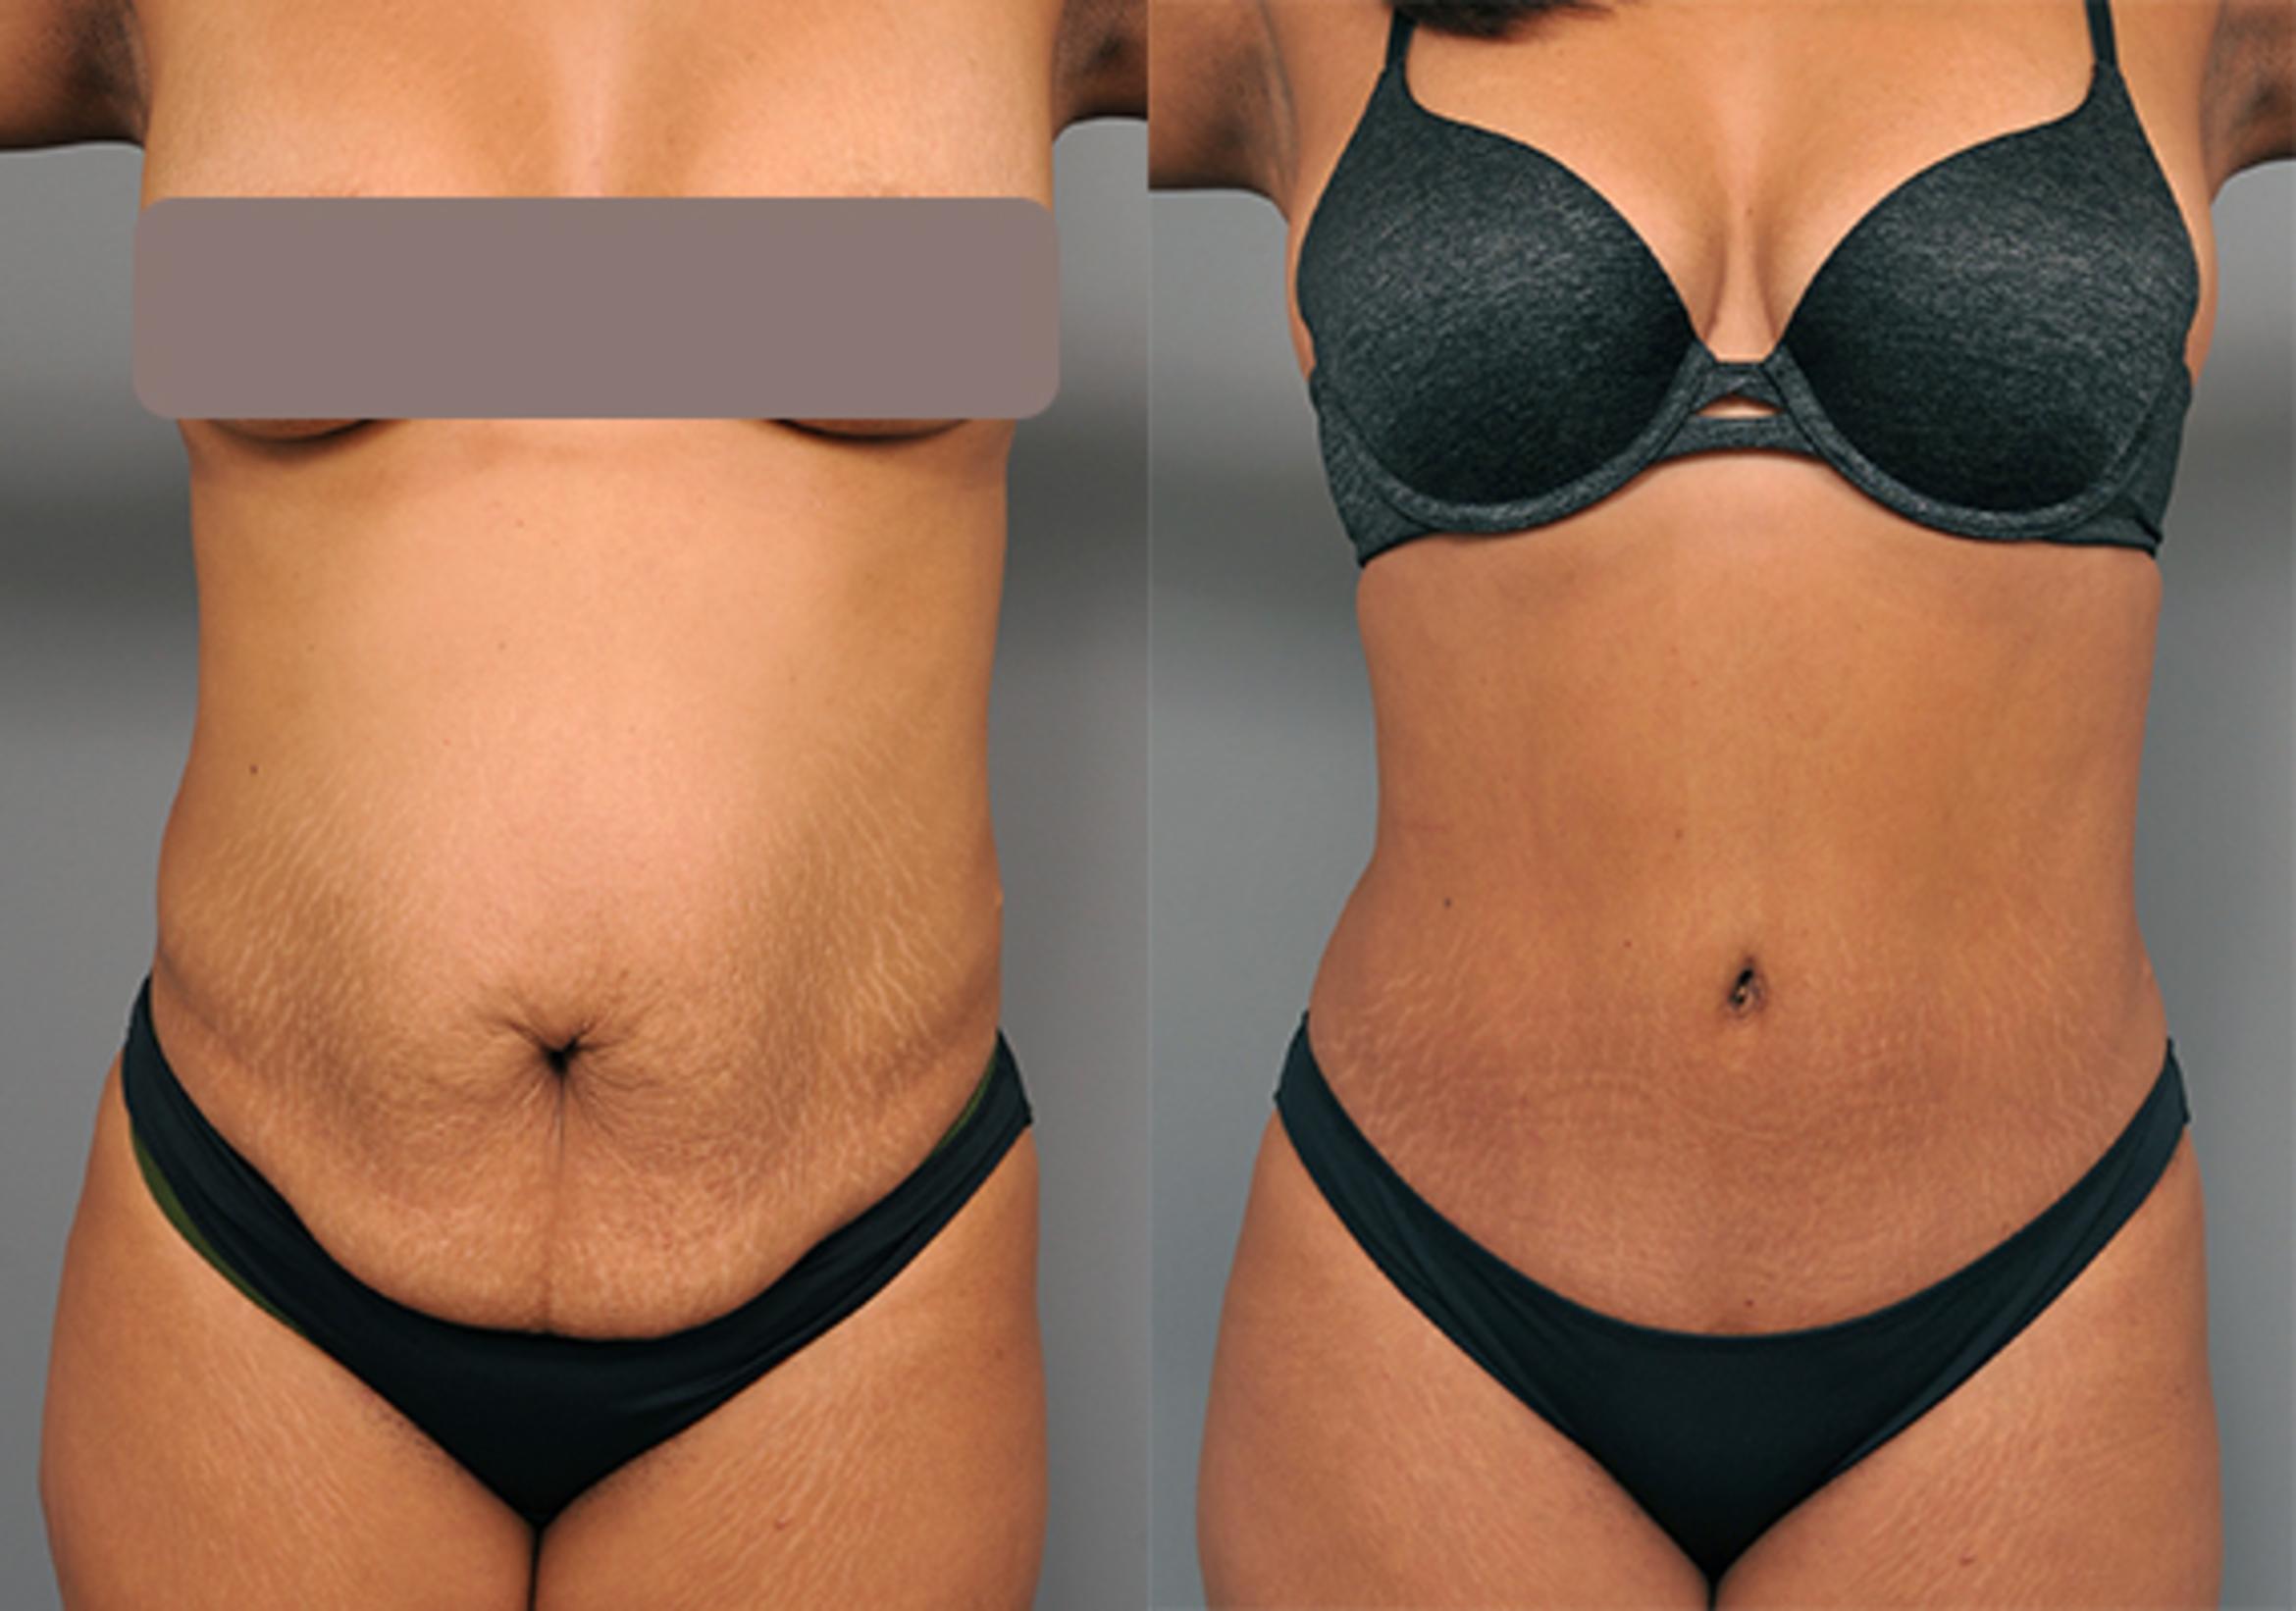 https://www.drtarekaesthetics.com/wp-content/uploads/2022/05/Can-You-Get-Tummy-Tuck-During-C-Section.jpg